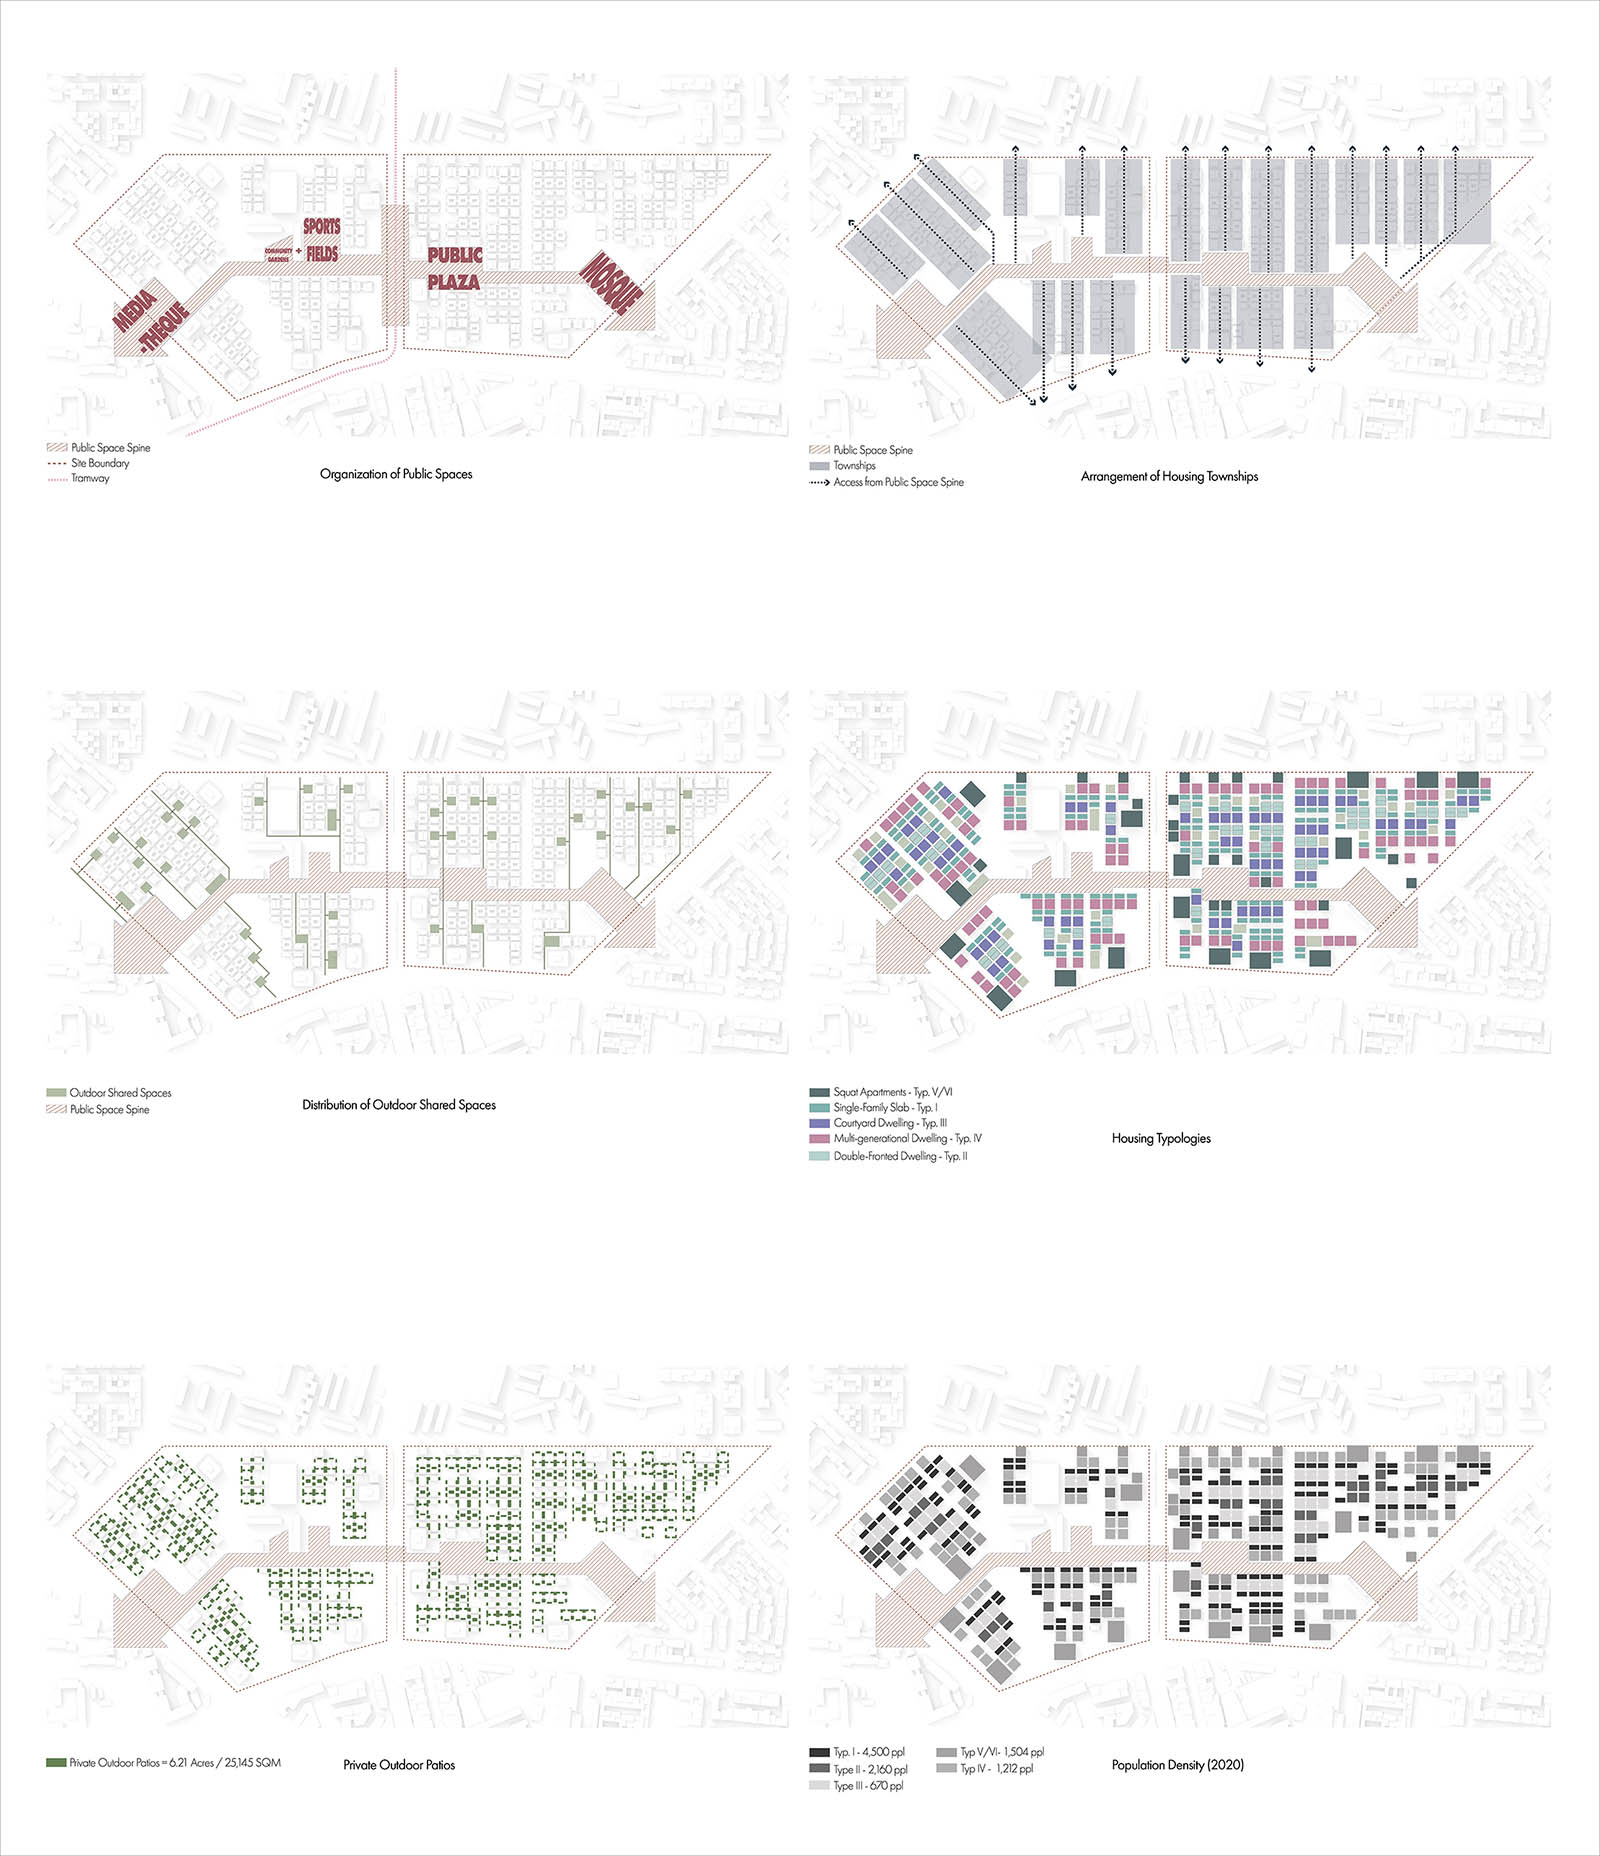 Urban Design strategies showing the organization of public spaces and residential townships.